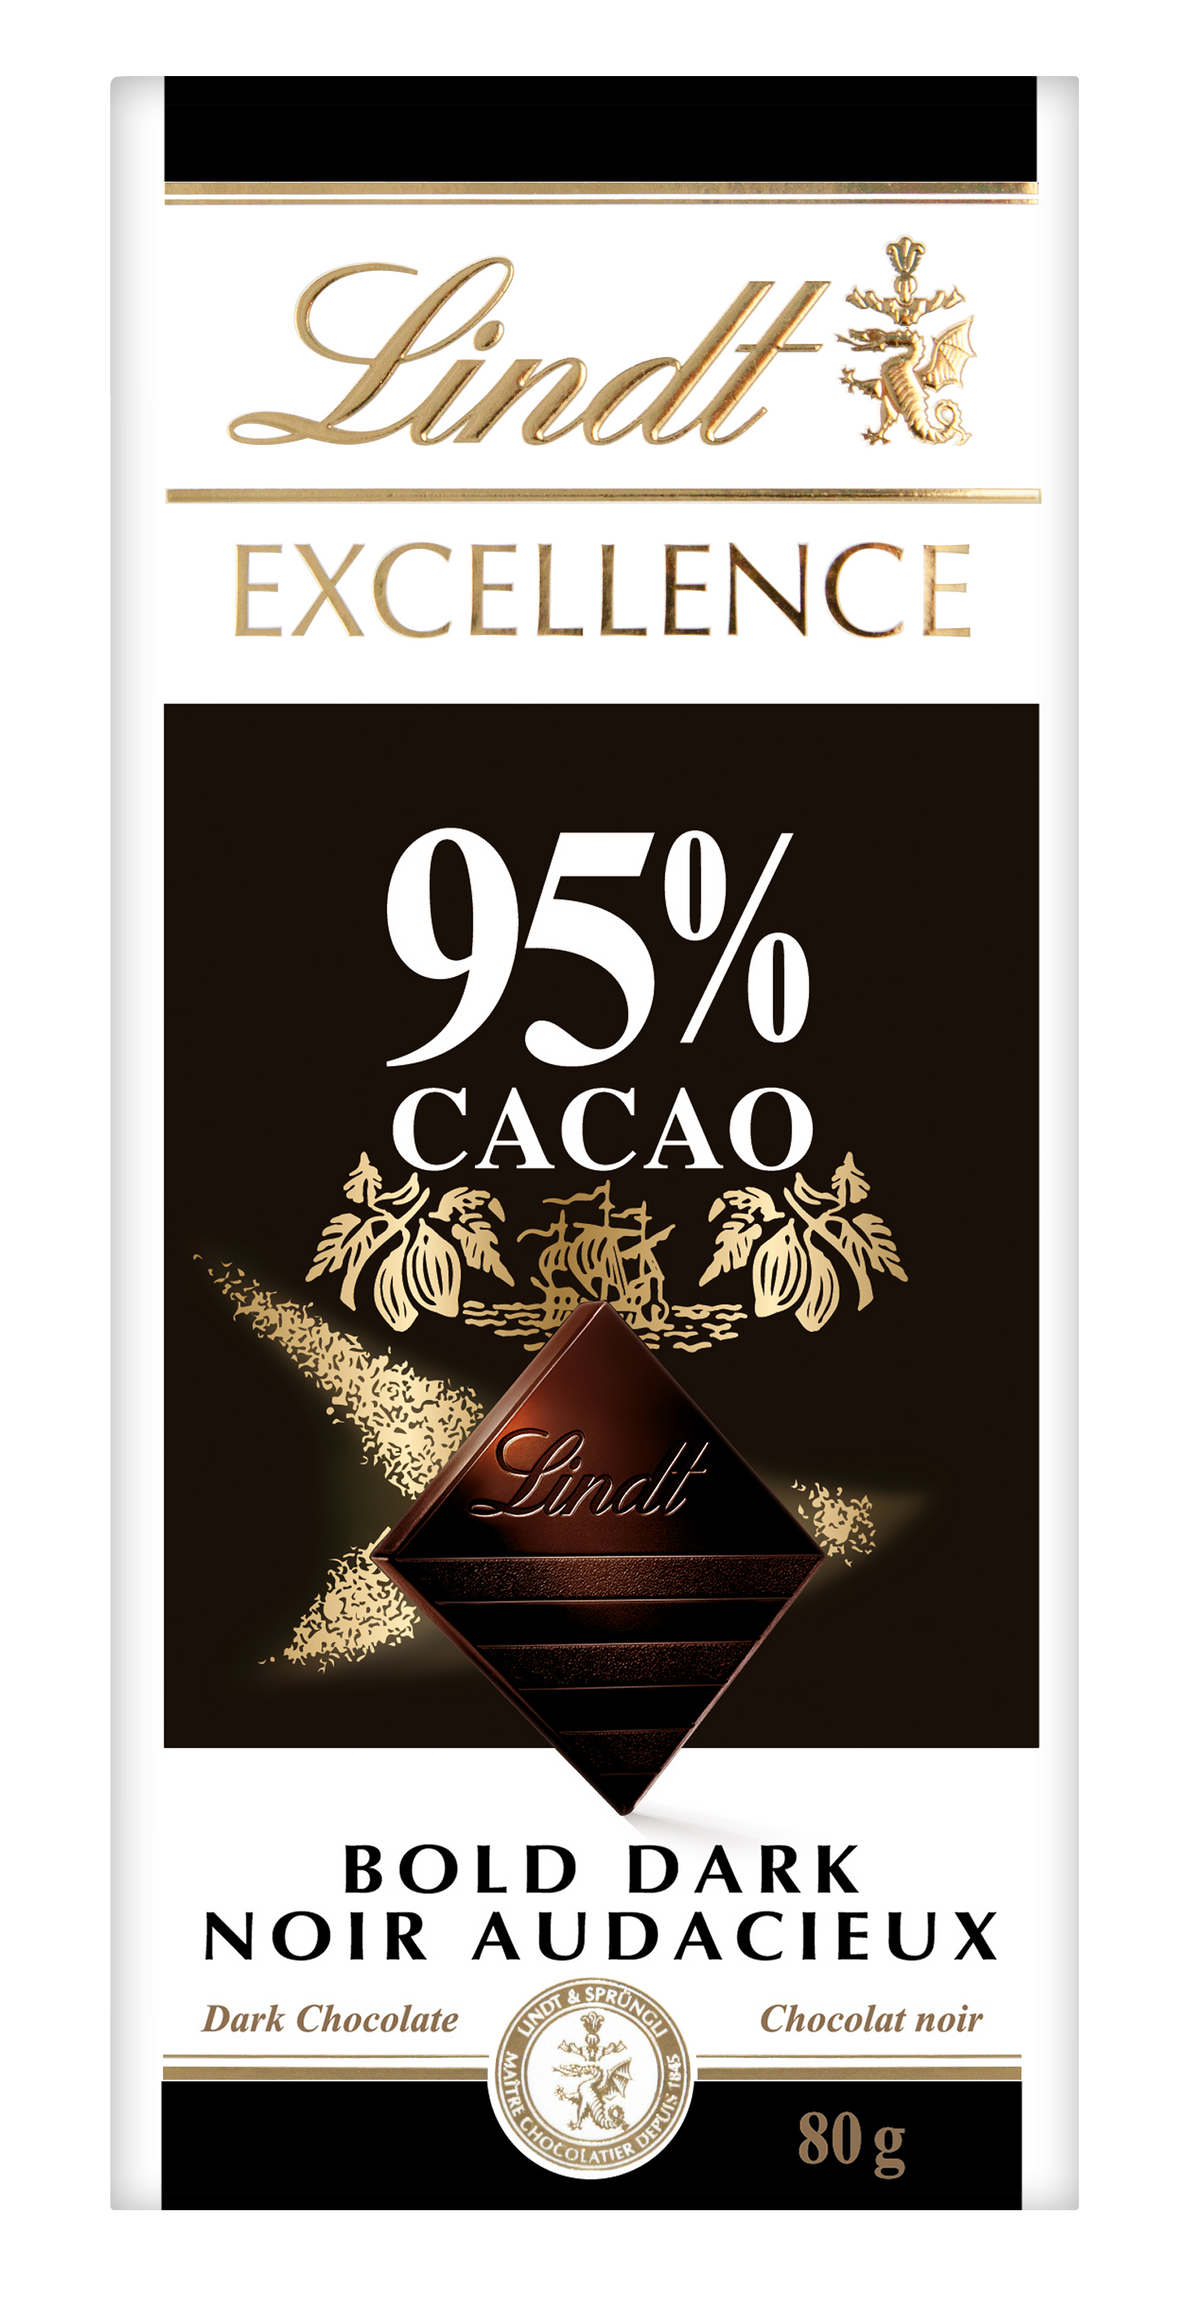 LINDT EXCELLENCE 95% CACAO 80G